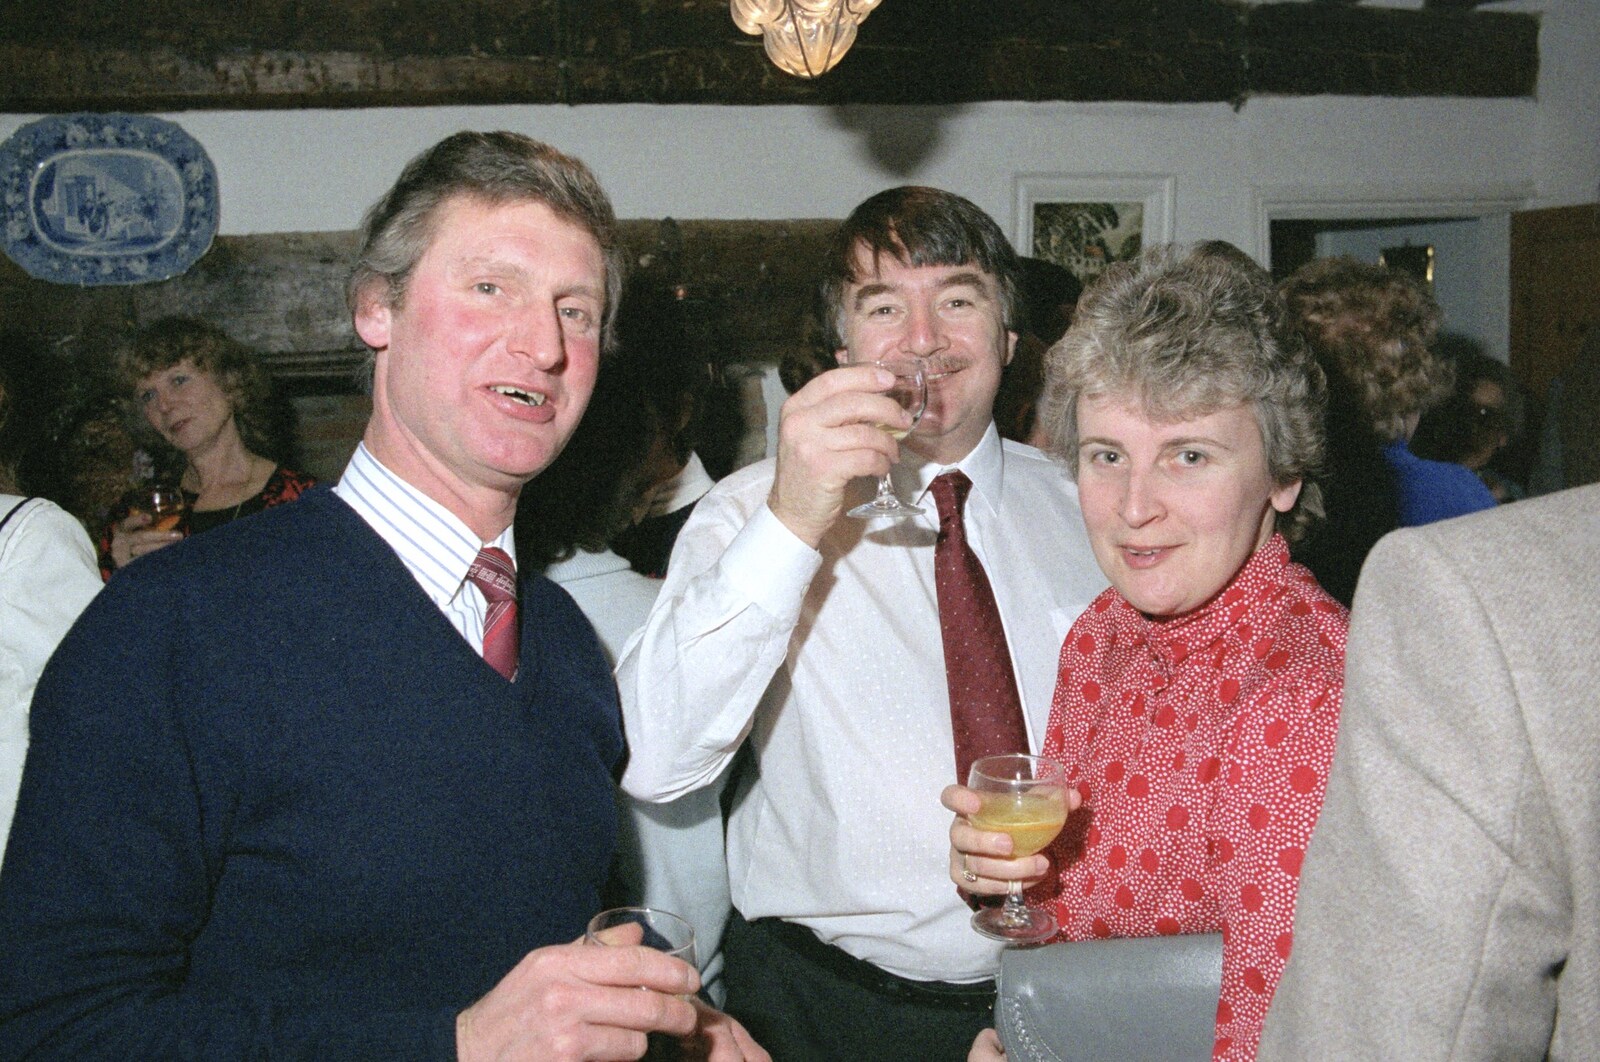 Geoff, David and Linda from Pancake Day in Starston, Norfolk - 27th February 1990